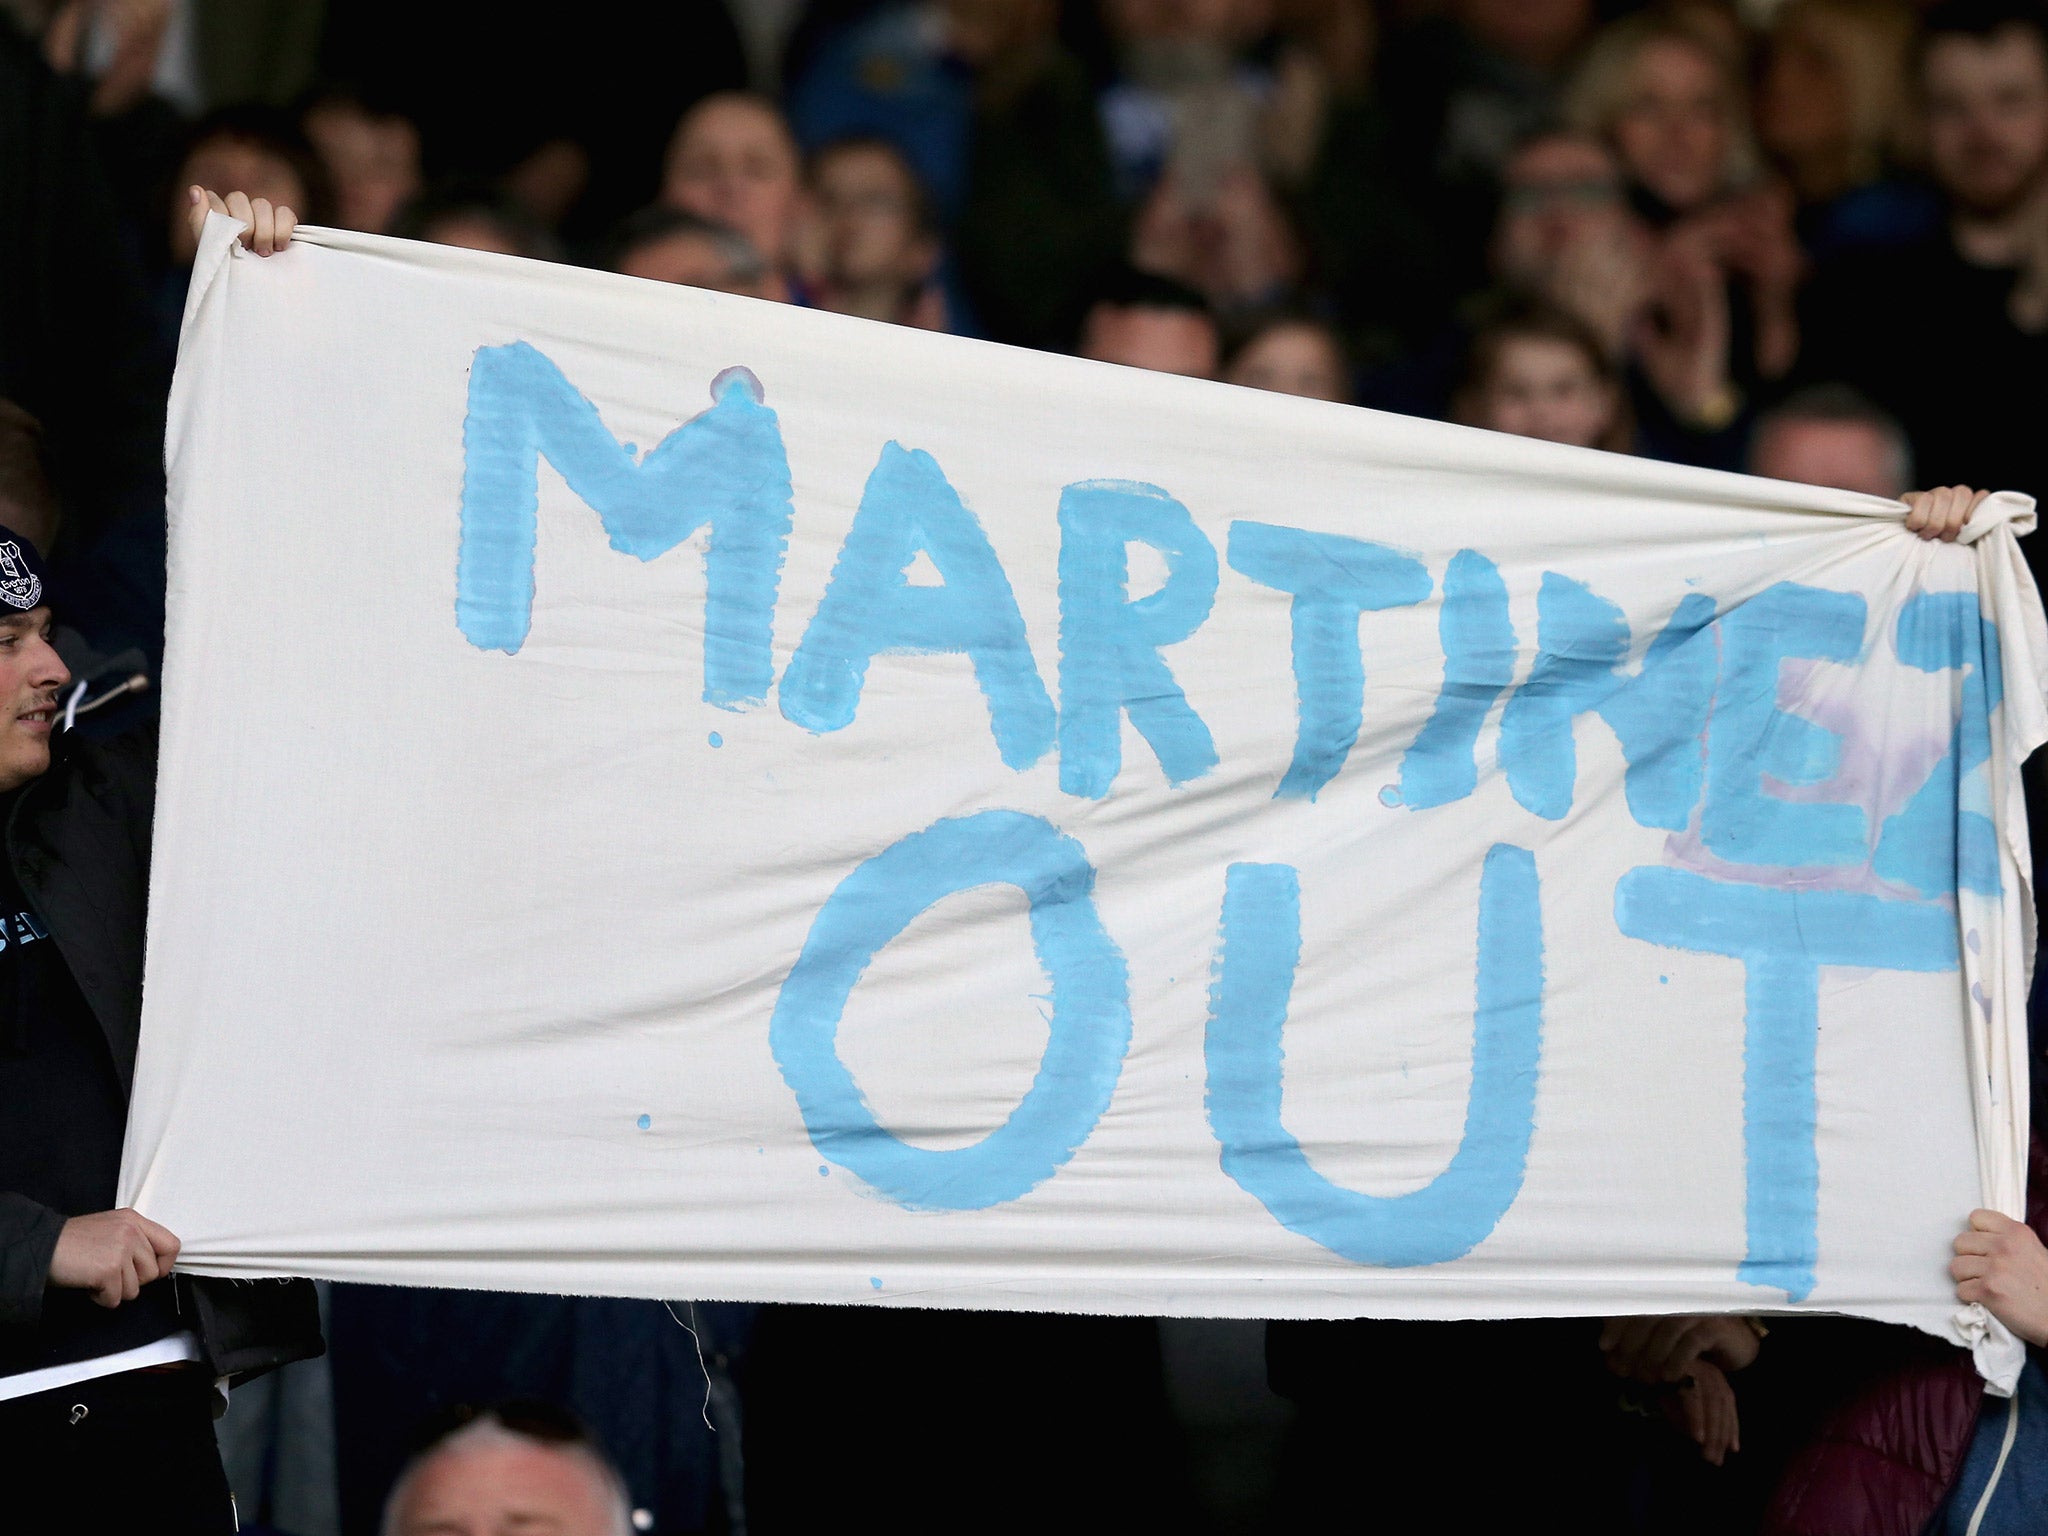 Everton fans have grown unhappy with Martinez's management